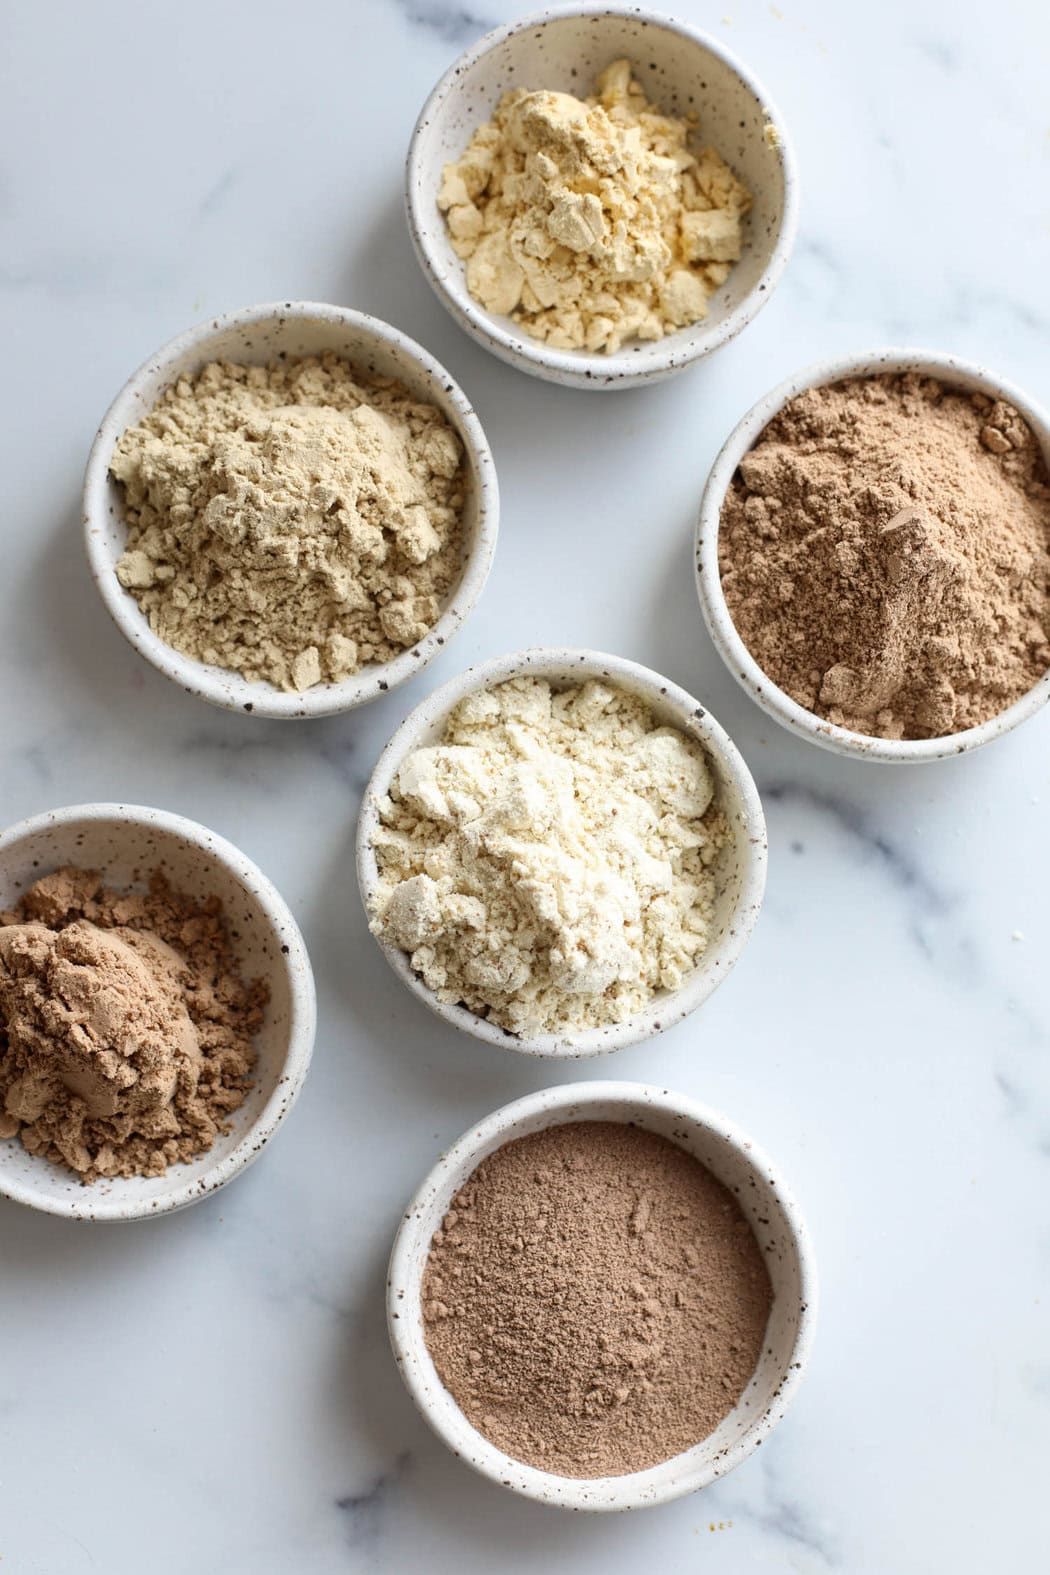 Is Protein Powder Wholesome? Dietitians Reply Prime Questions